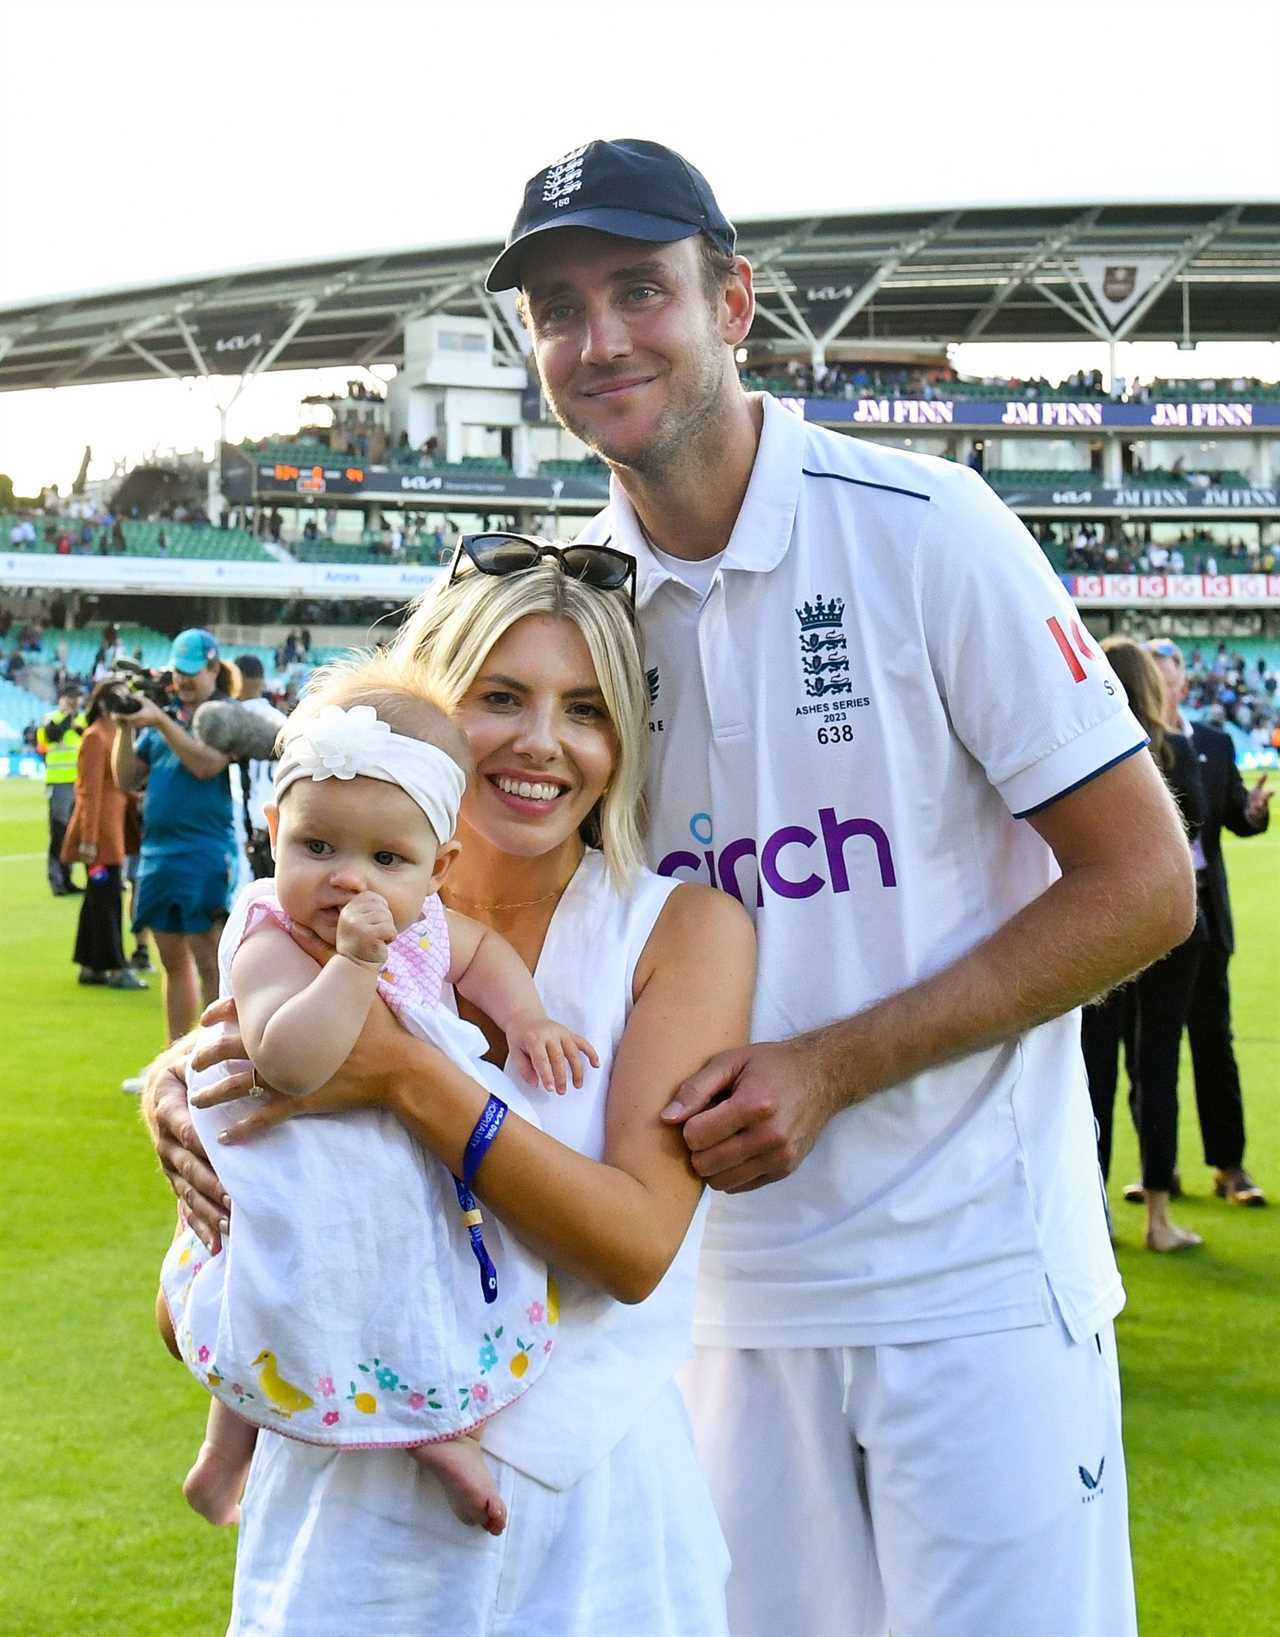 Mandatory Credit: Photo by Ashley Western/Colorsport/Shutterstock (14024833cl) Cricket - 2023 LV=Insurance Men's Ashes Series - Fifth Test - England vs Australia - Kia Oval, Kennington - Monday 31st July 2023. Stuart Broad of England with his partner Mollie King and daughter Annabella. COLORSPORT / Ashley Western England v Australia, The Ashes, 5th Test, Day Five, LV= Insurance Men's Ashes Series, Cricket, The Oval, London, UK - 31 Jul 2023